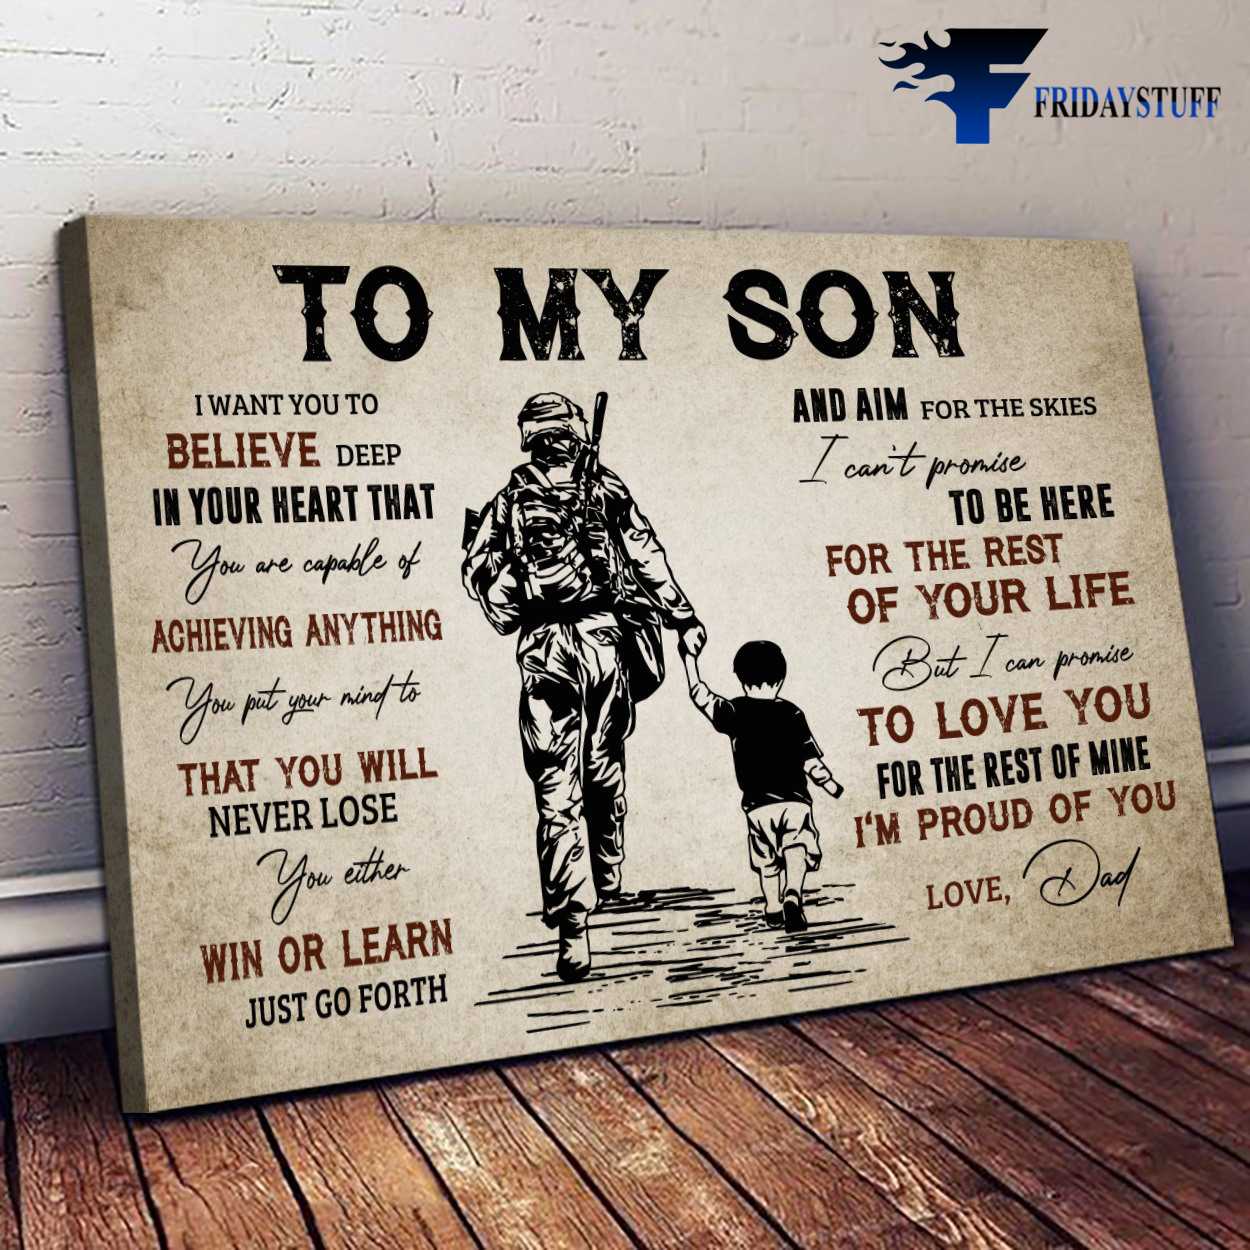 Soldier Poster, Dad And Son, I Want You To Believe Deep In Your Heart That, You Are Capable Of Achieving Anything, You Put Your Mind To That, You Will Never Lose